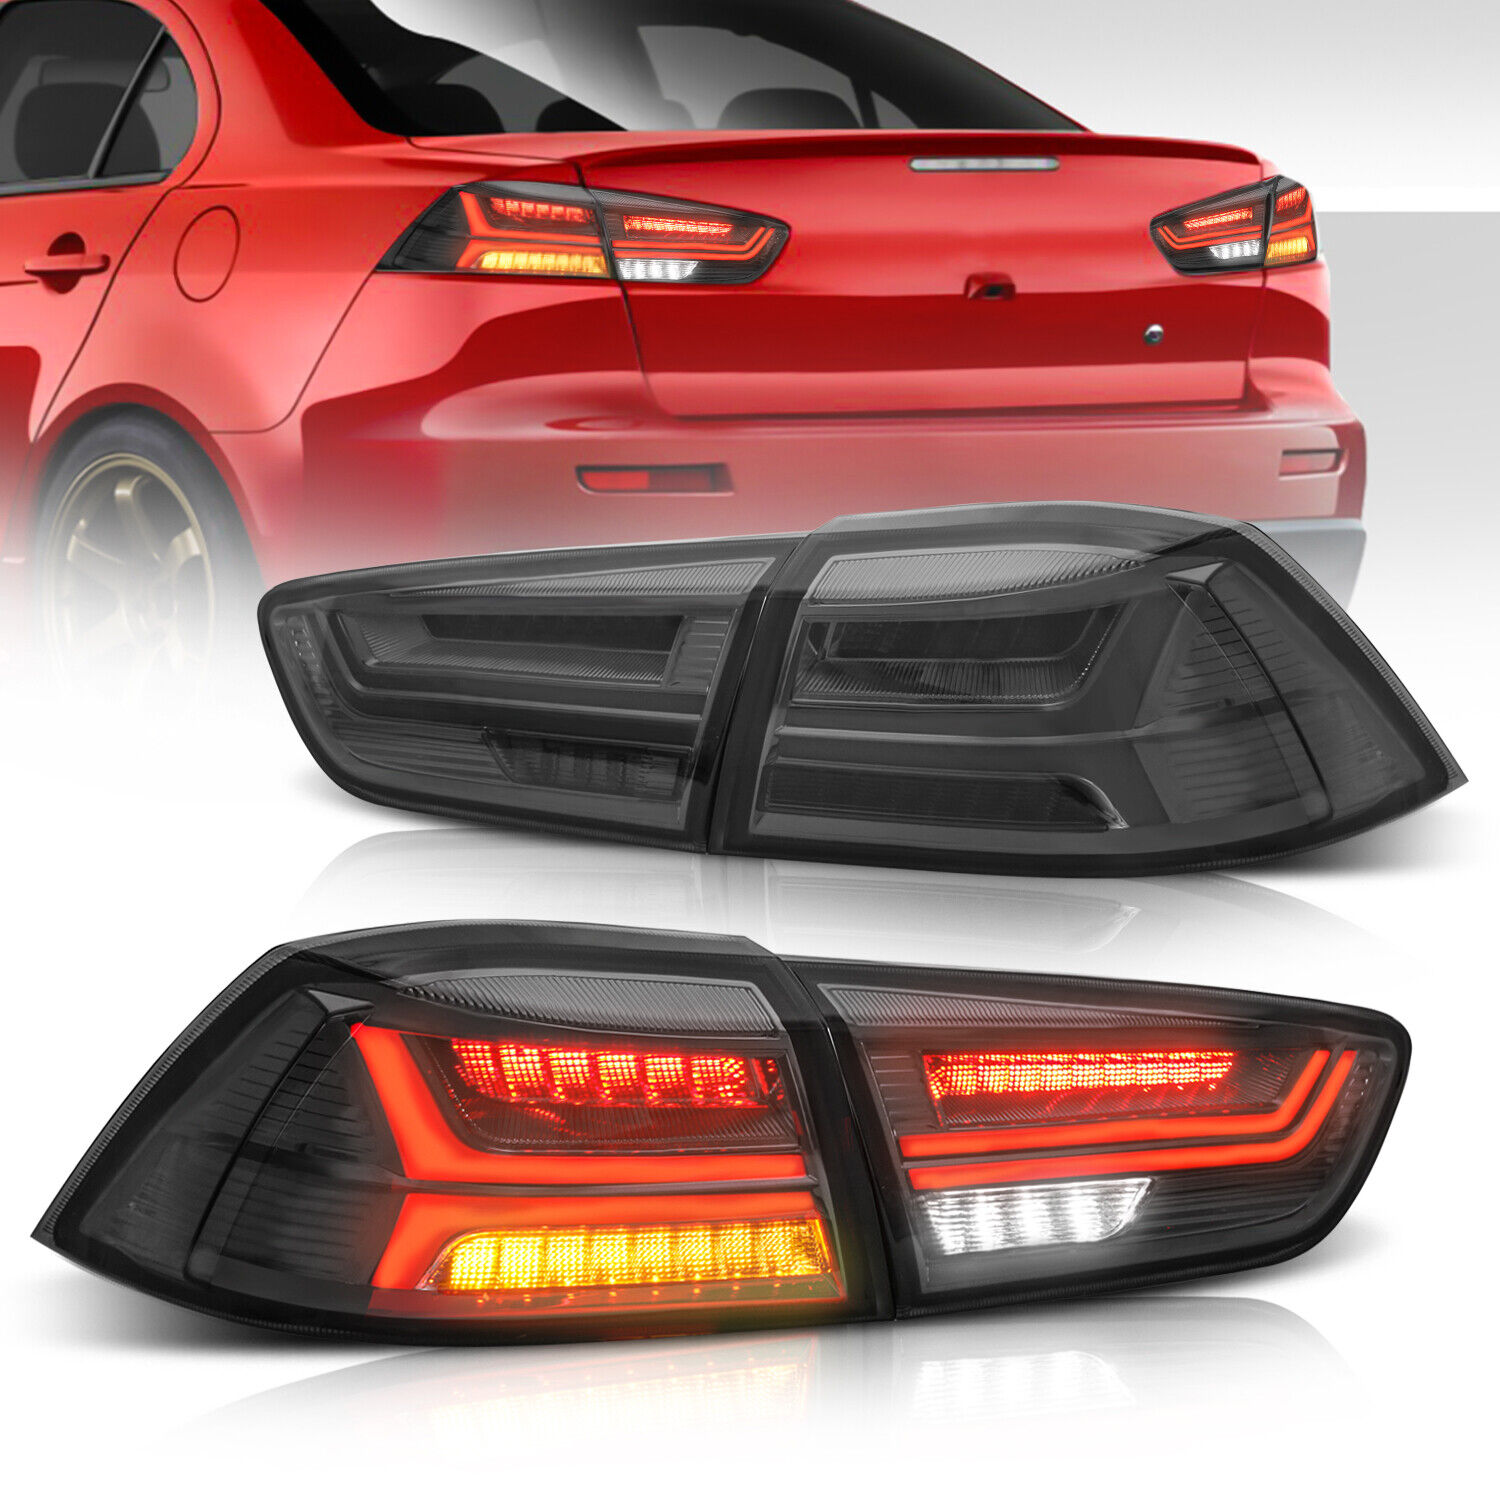 2x Smoked LED Tail Lights Rear Lamps For 08-17 Mitsubishi Lancer EVO LH+RH Side